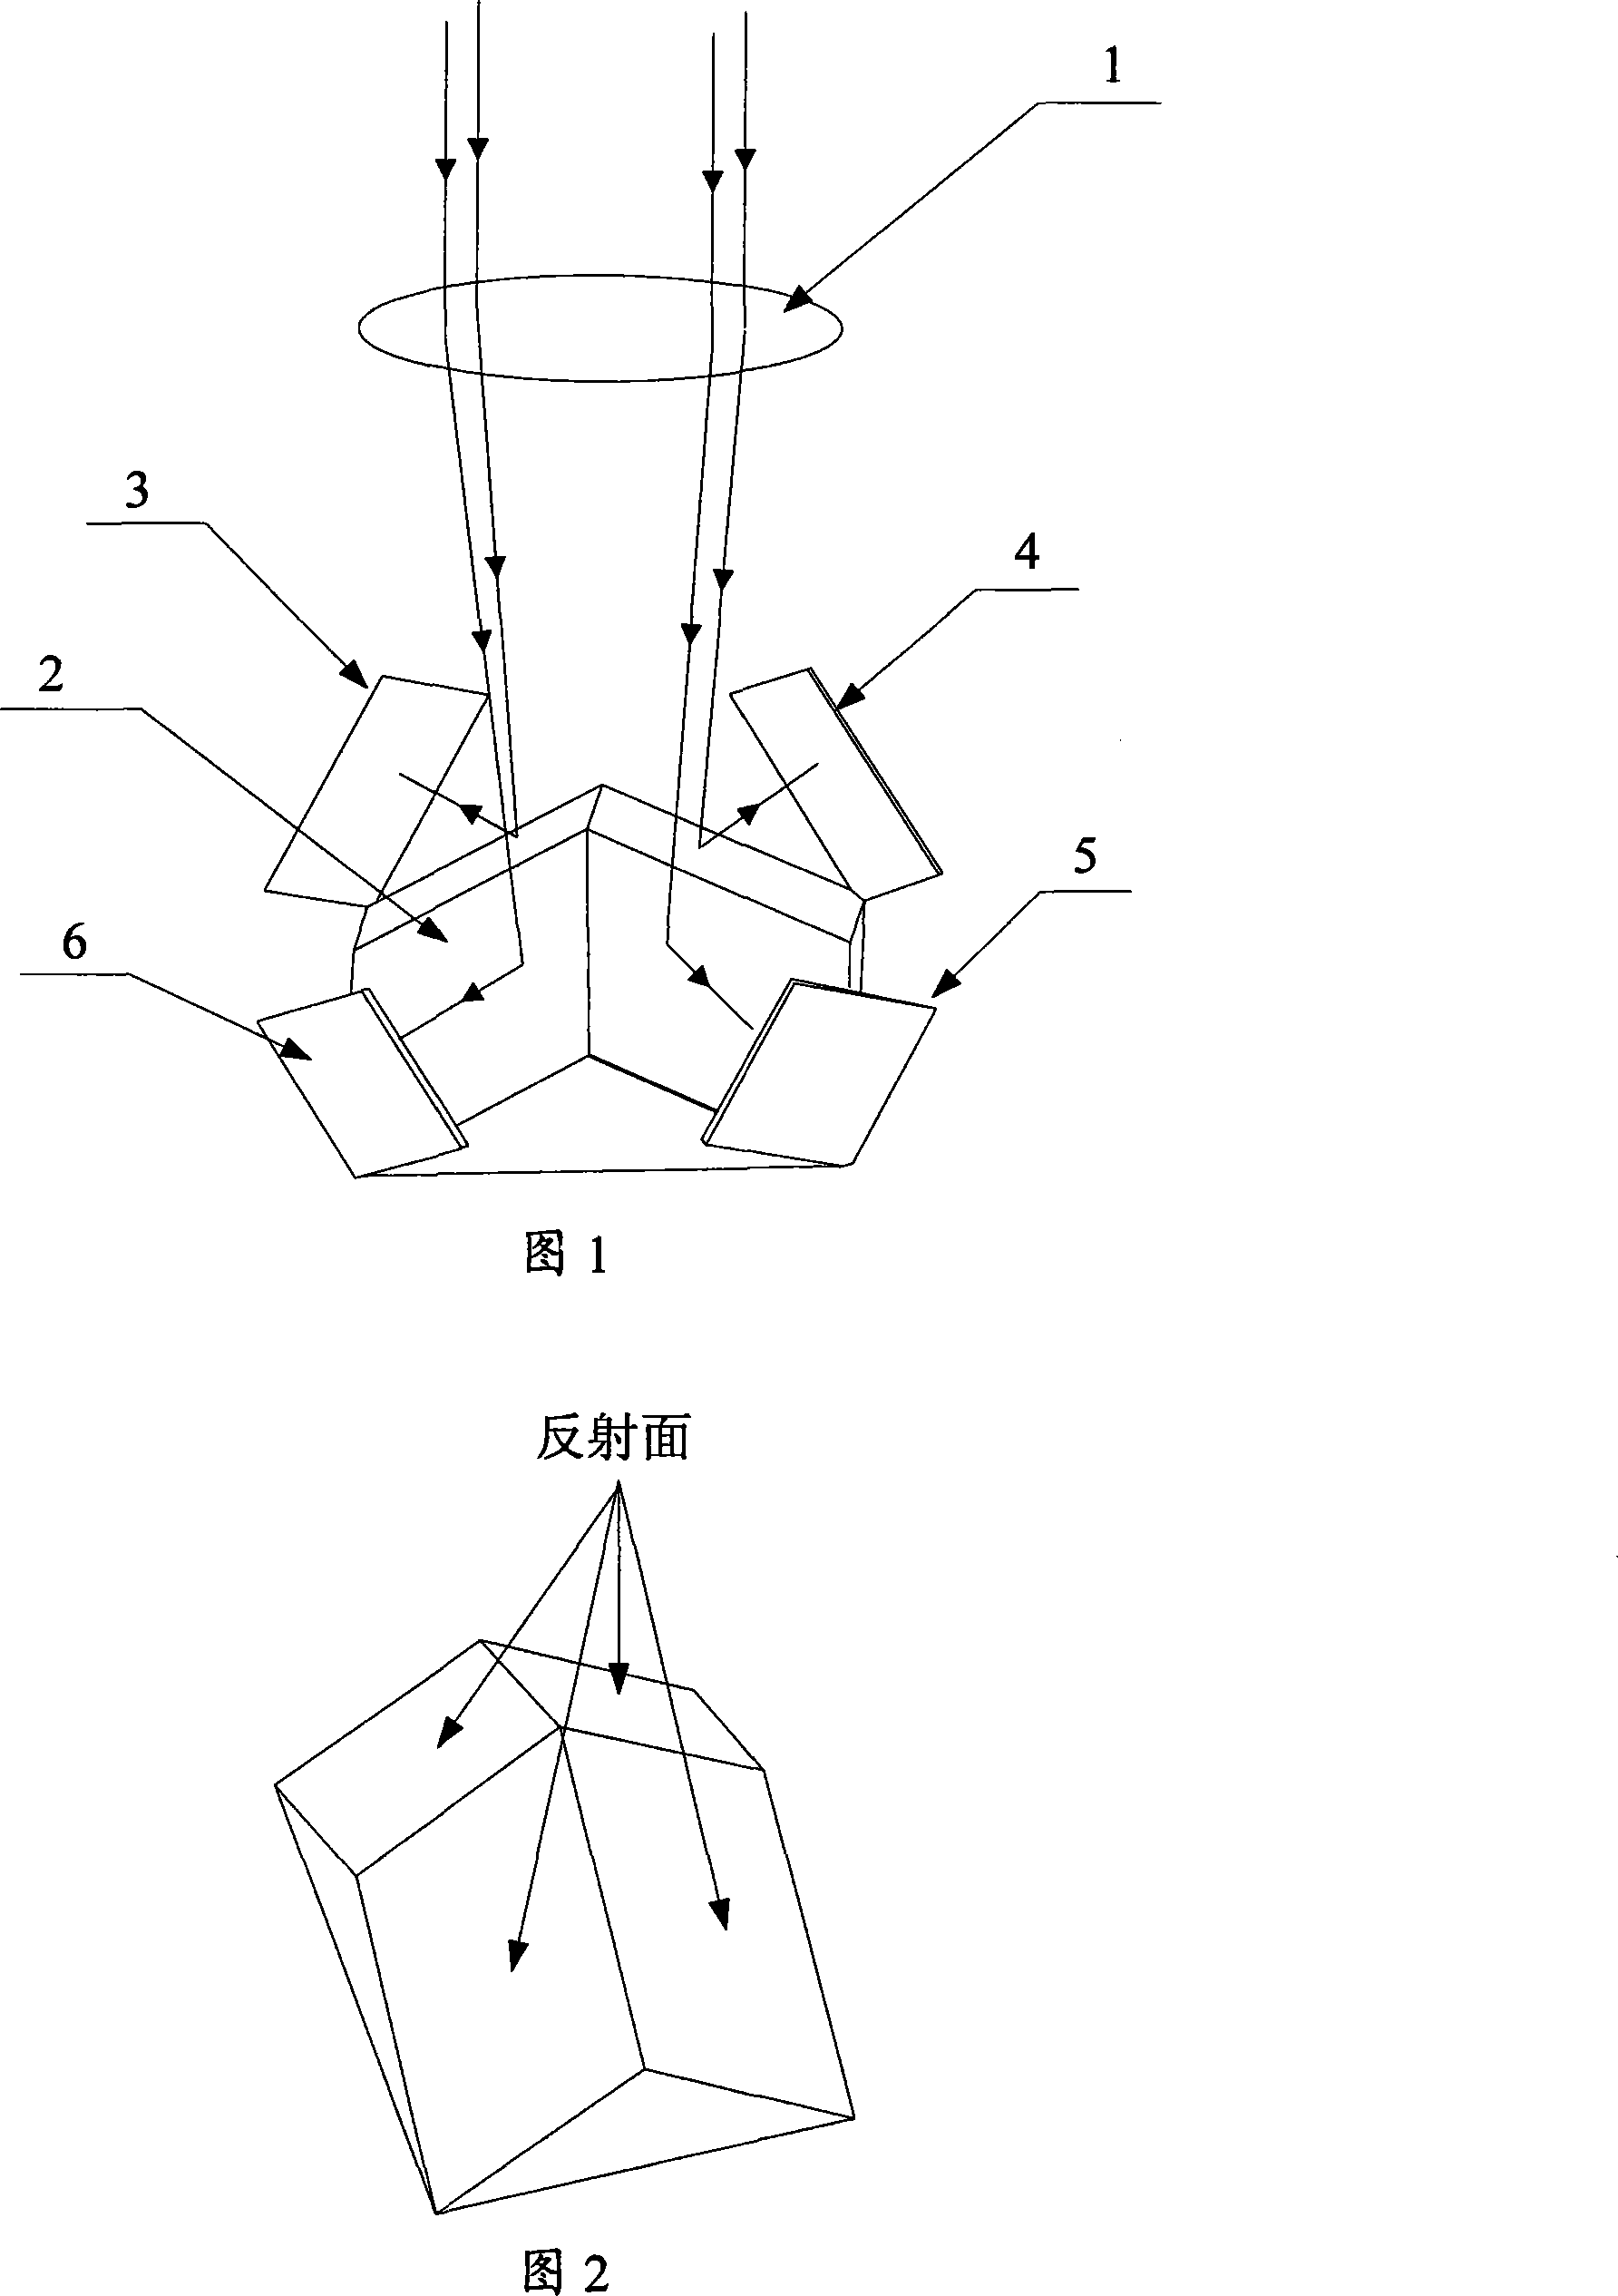 Electro-optical system for implementing multiple CCD seamless concatenation using prismatic decomposition vignetting compensation